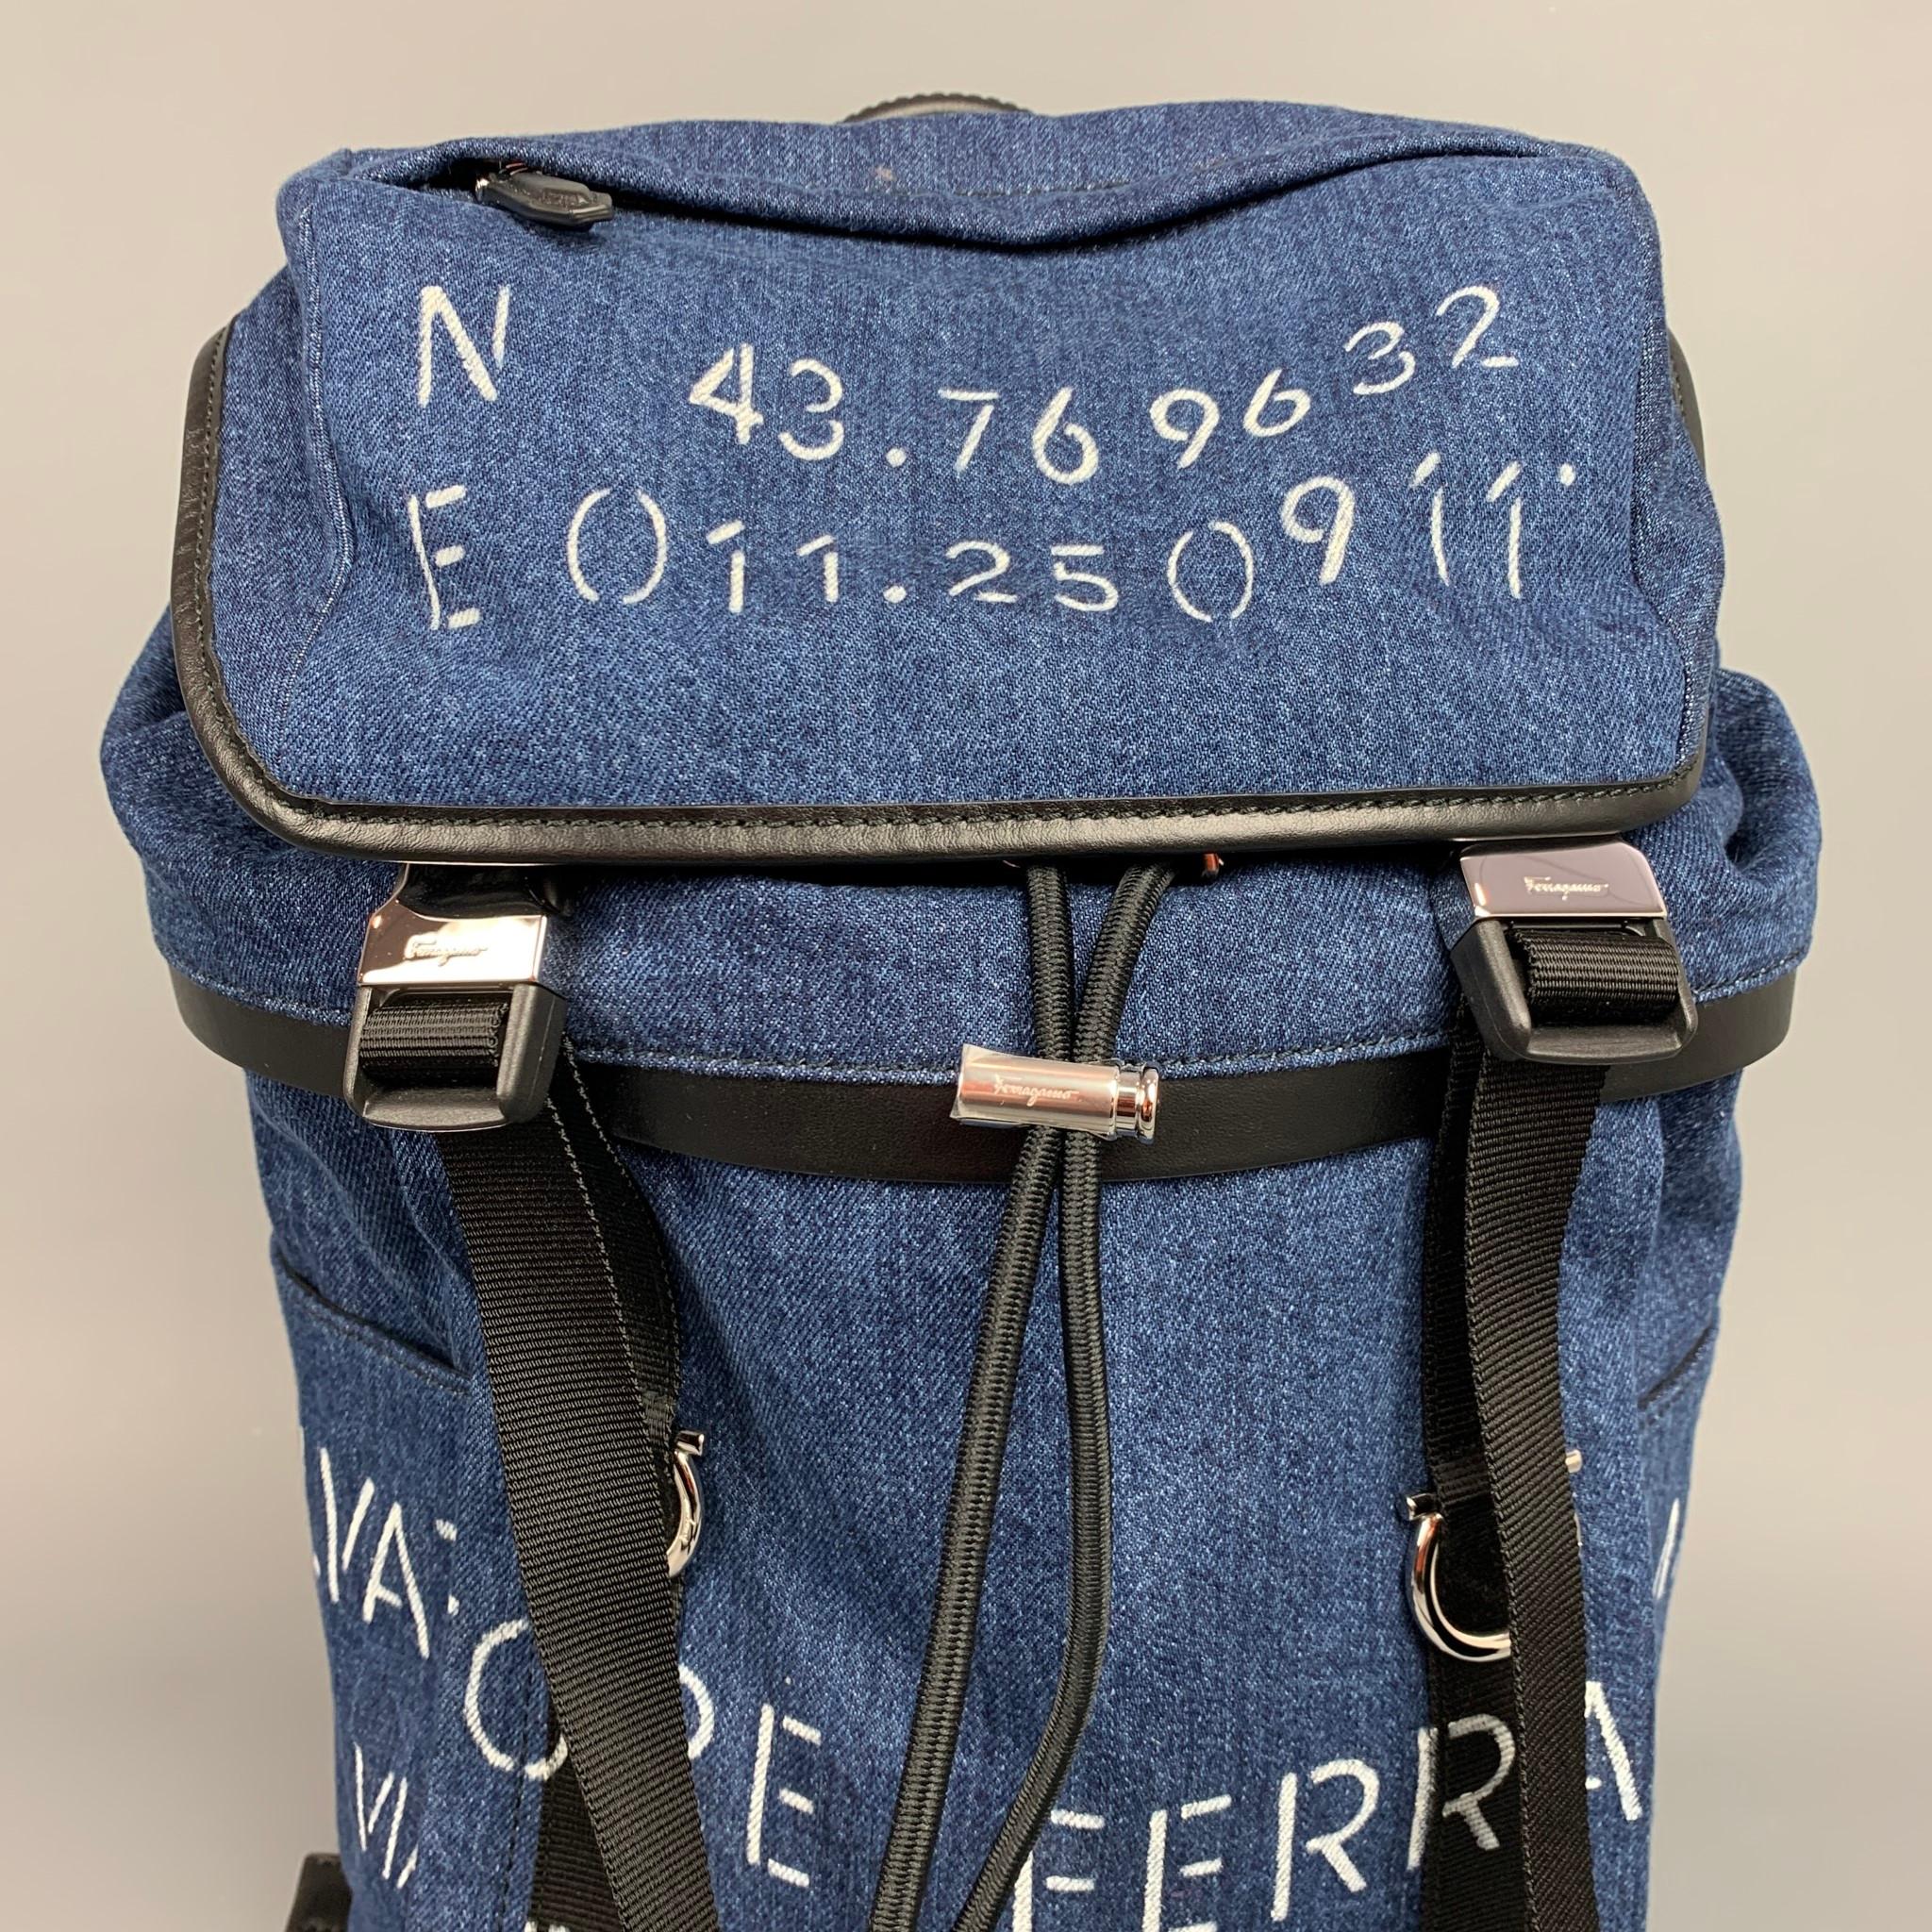 SALVATORE FERRAGAMO backpack comes in a indigo denim with logo print details featuring leather trim details, inner zipper pockets, padded mesh panels at back, signature gancini hardware on straps, and front buckle closures. Comes with dust bag. Made